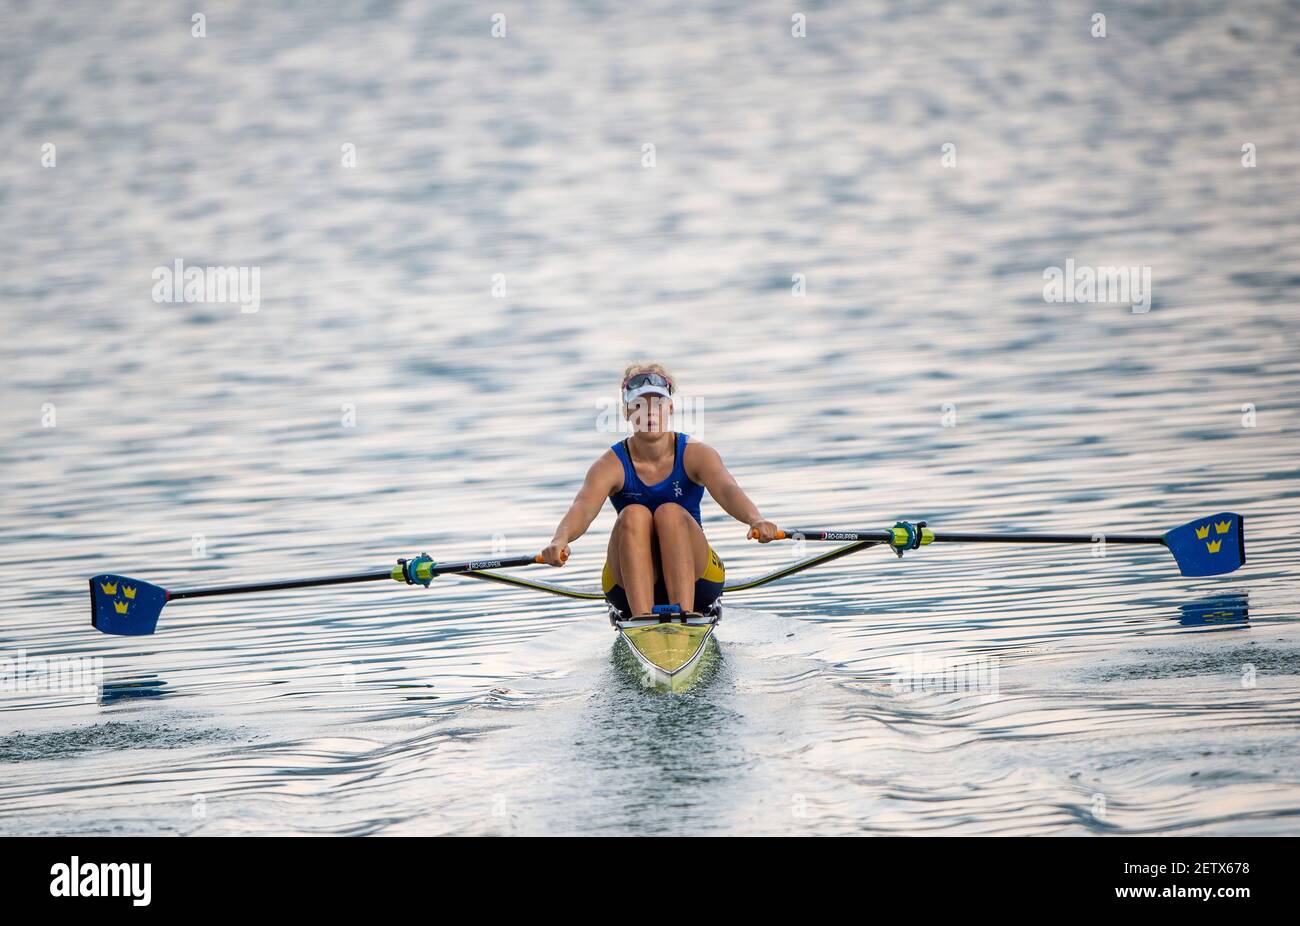 Linz, Austria, Sunday,  25th Aug 2019, FISA World Rowing Championship, Regatta,  303SWE W1X, Lovisa CLAESSON, moving away, from the start pontoon, in her heat, [Mandatory Credit; Peter SPURRIER/Intersport Images]  16:37:05  25.08.19 Stock Photo